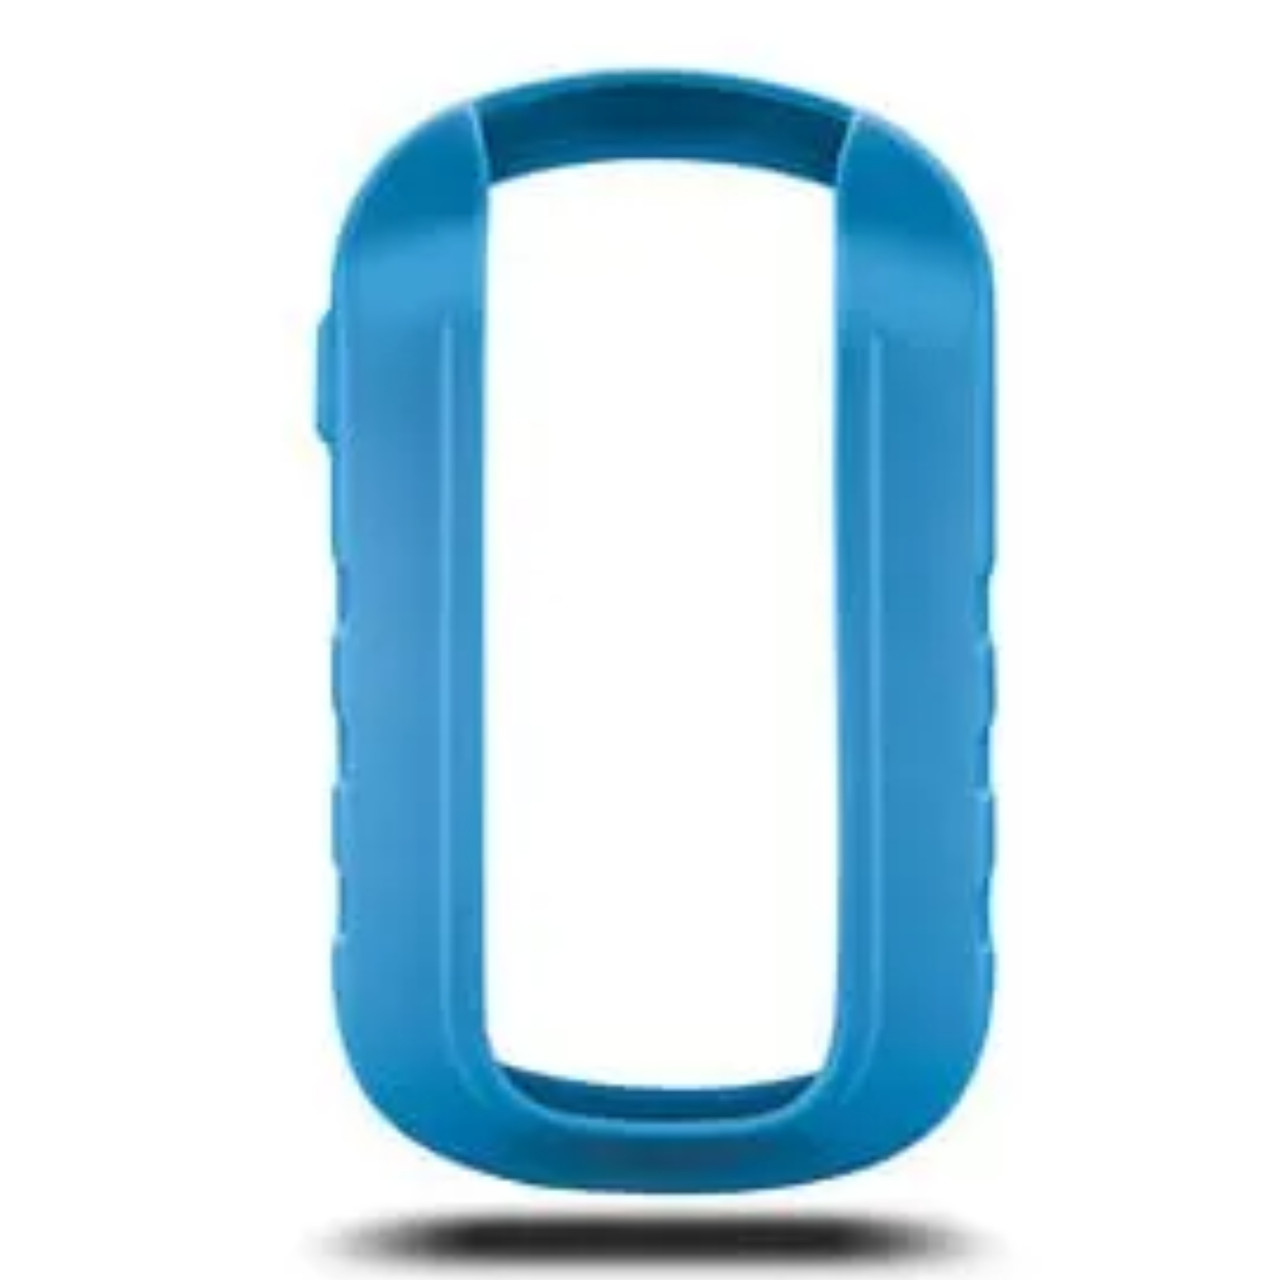 Garmin New OEM Silicone Cases (eTrex® Touch 25/35) Blue, 010-12178-00